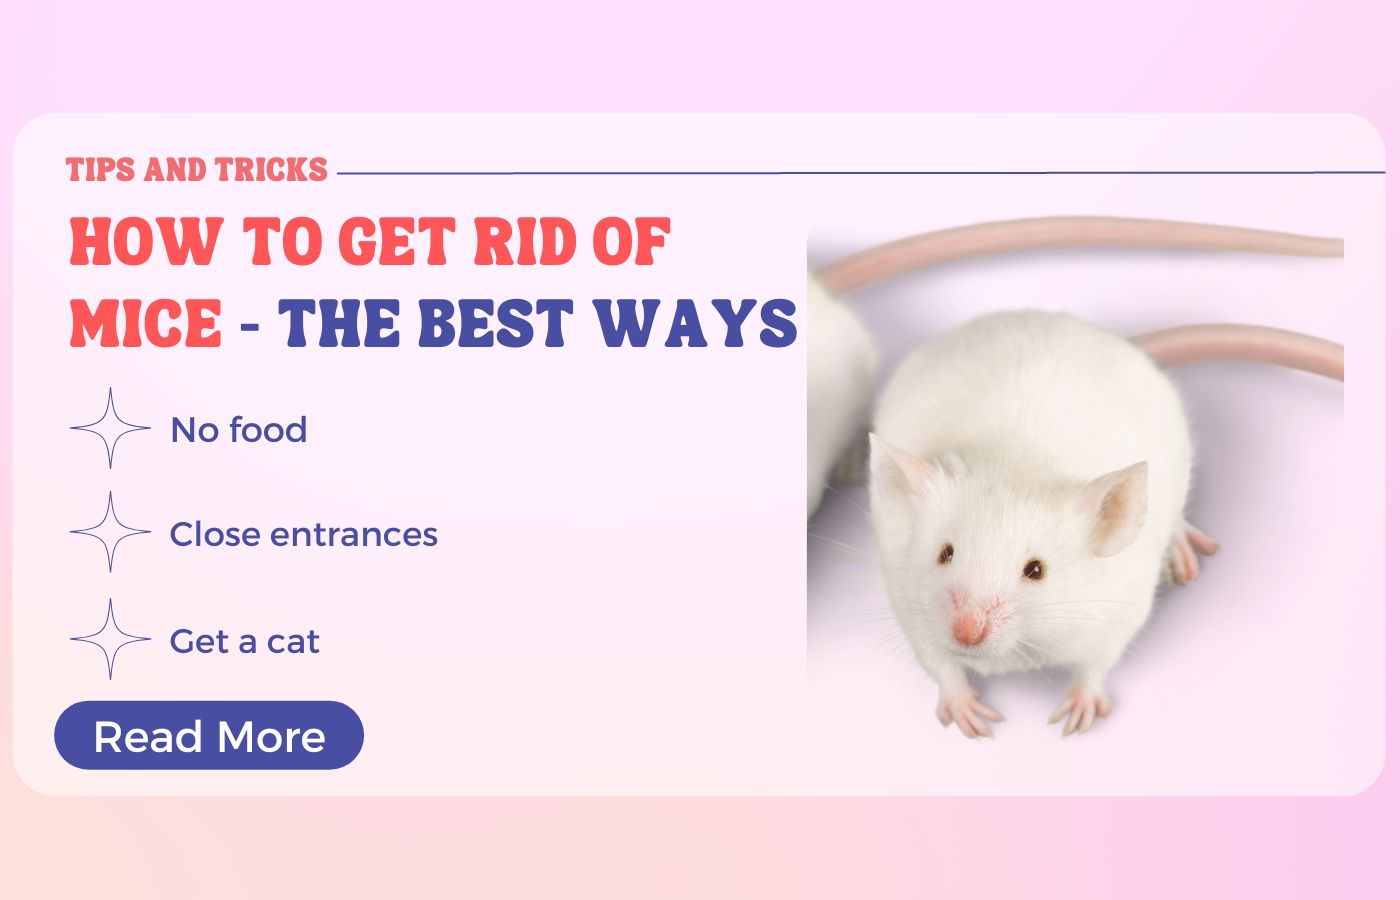 How To Get Rid Of Mice - The Best Ways